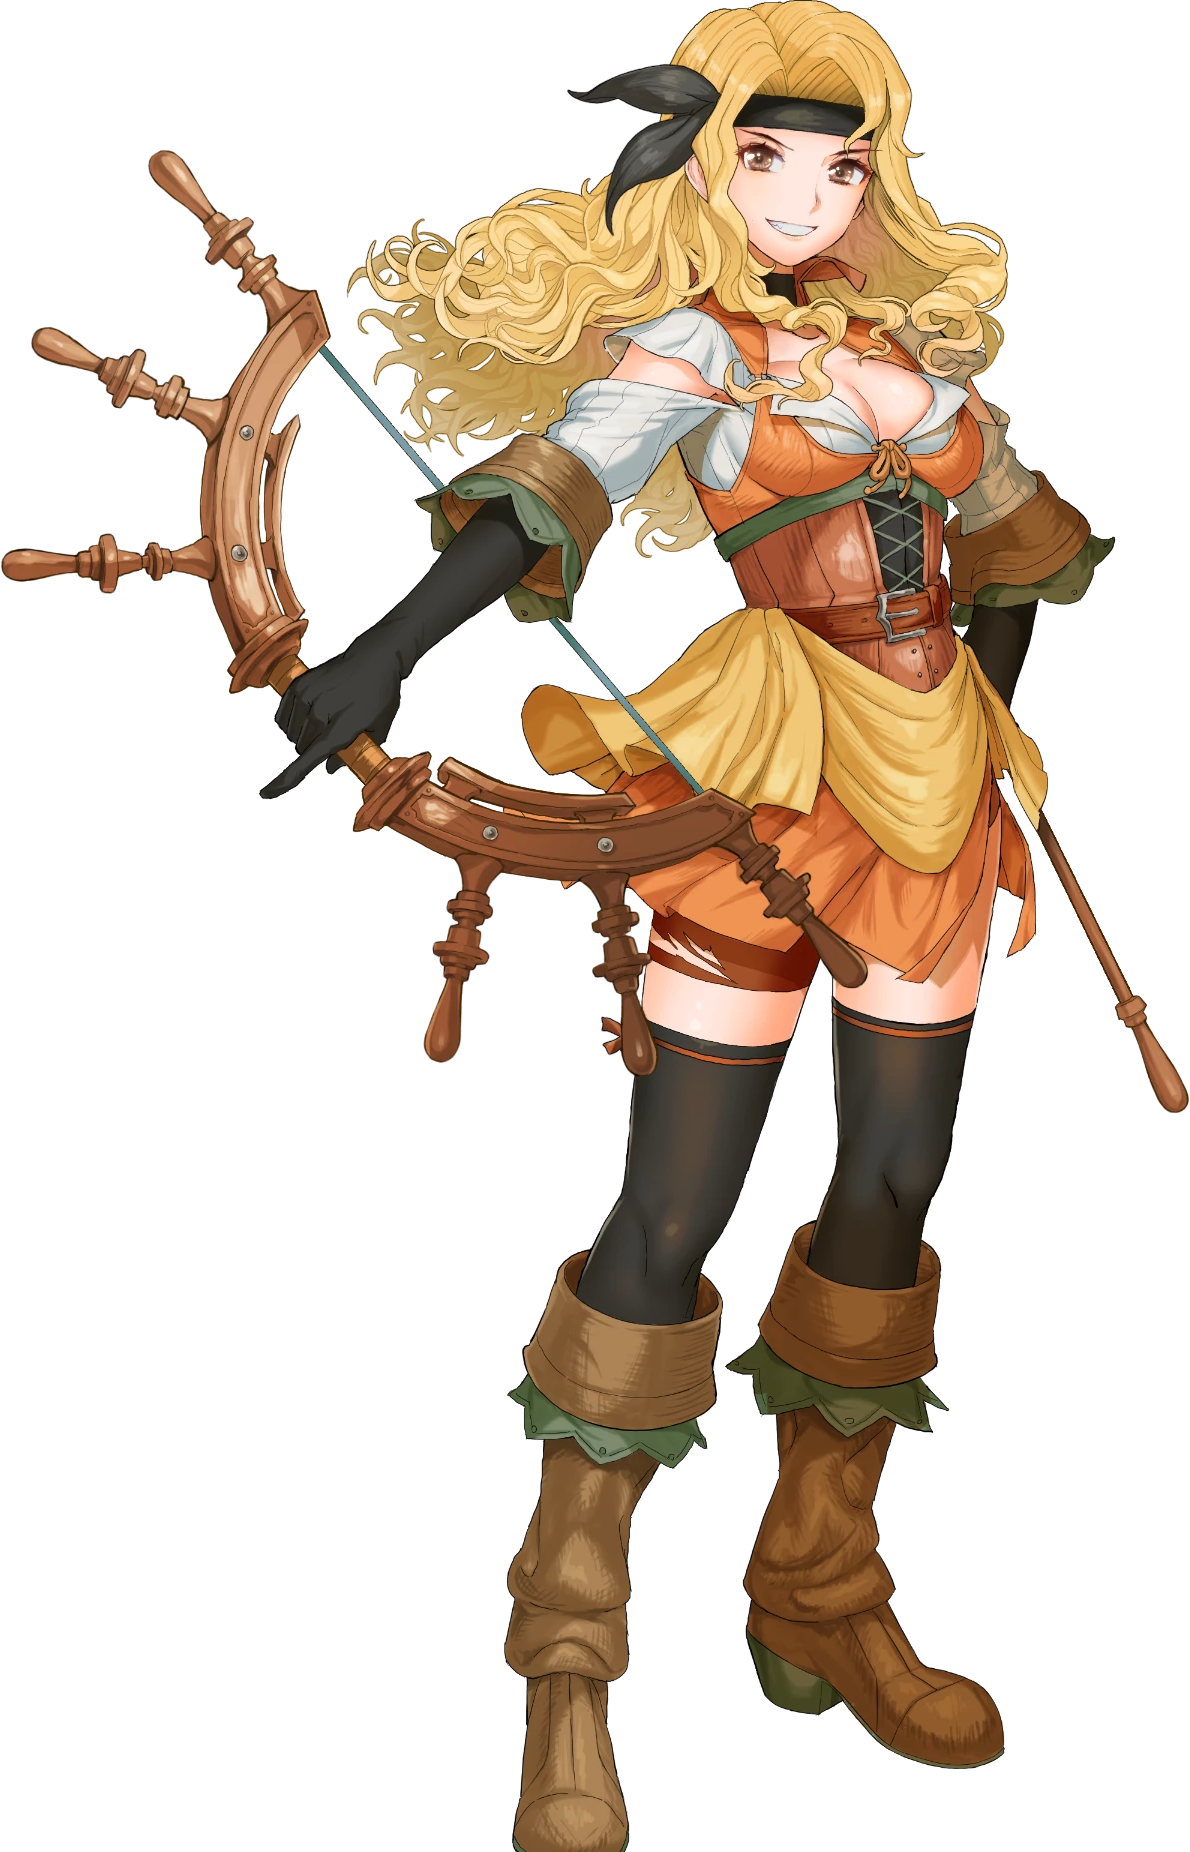 Brigid's portrait from Heroes. A grinning blonde woman with a bandana and orange tunic, holding a bow fashioned from a ship's wheel.